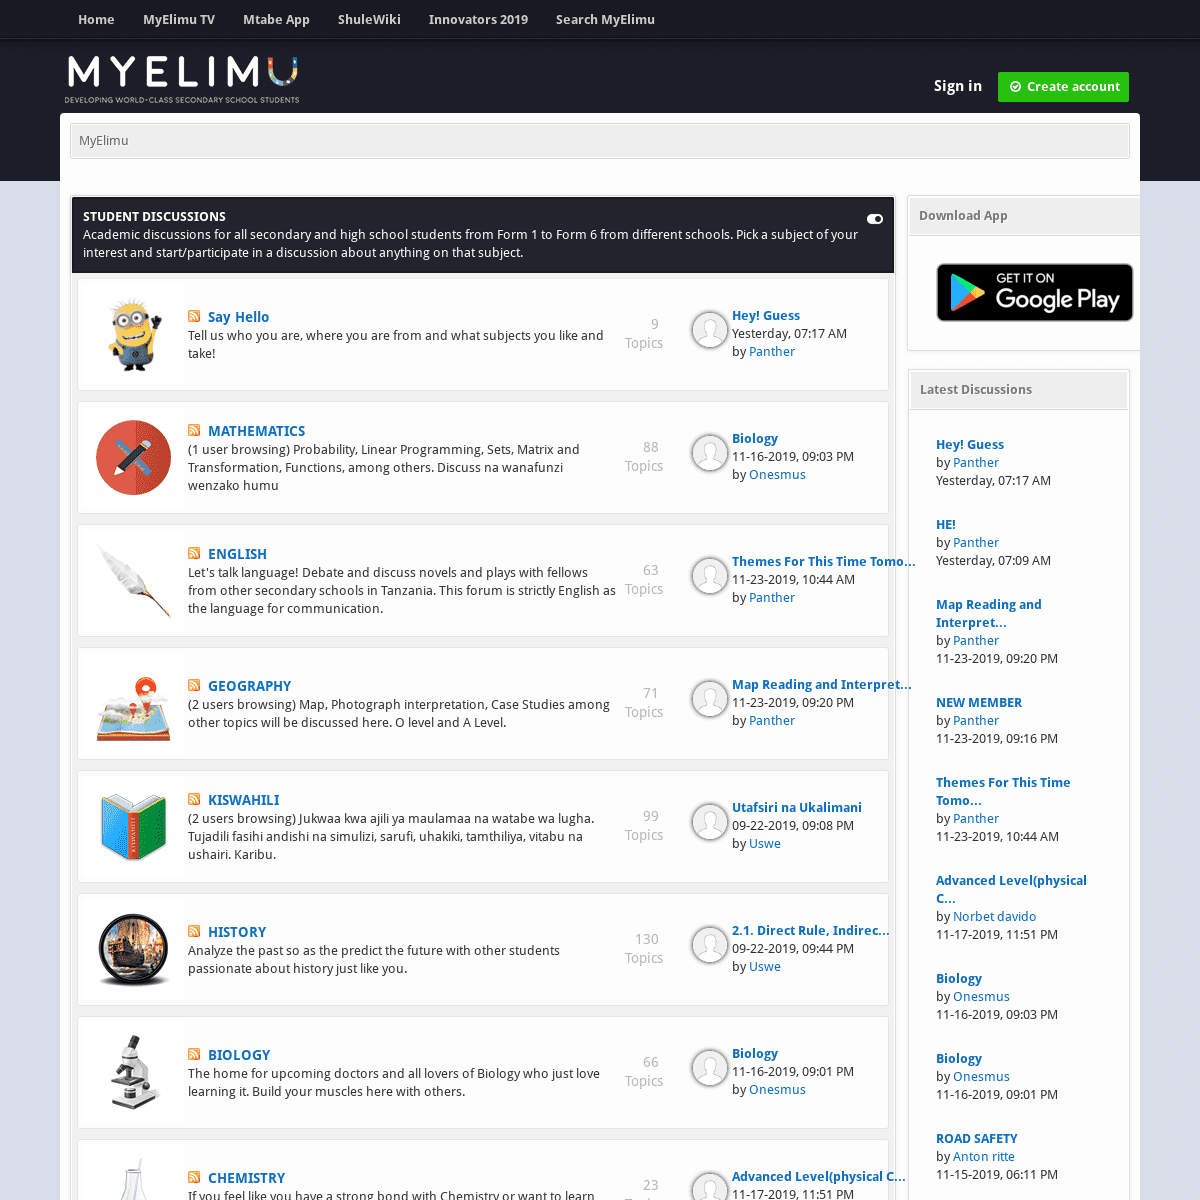 A complete backup of myelimu.com